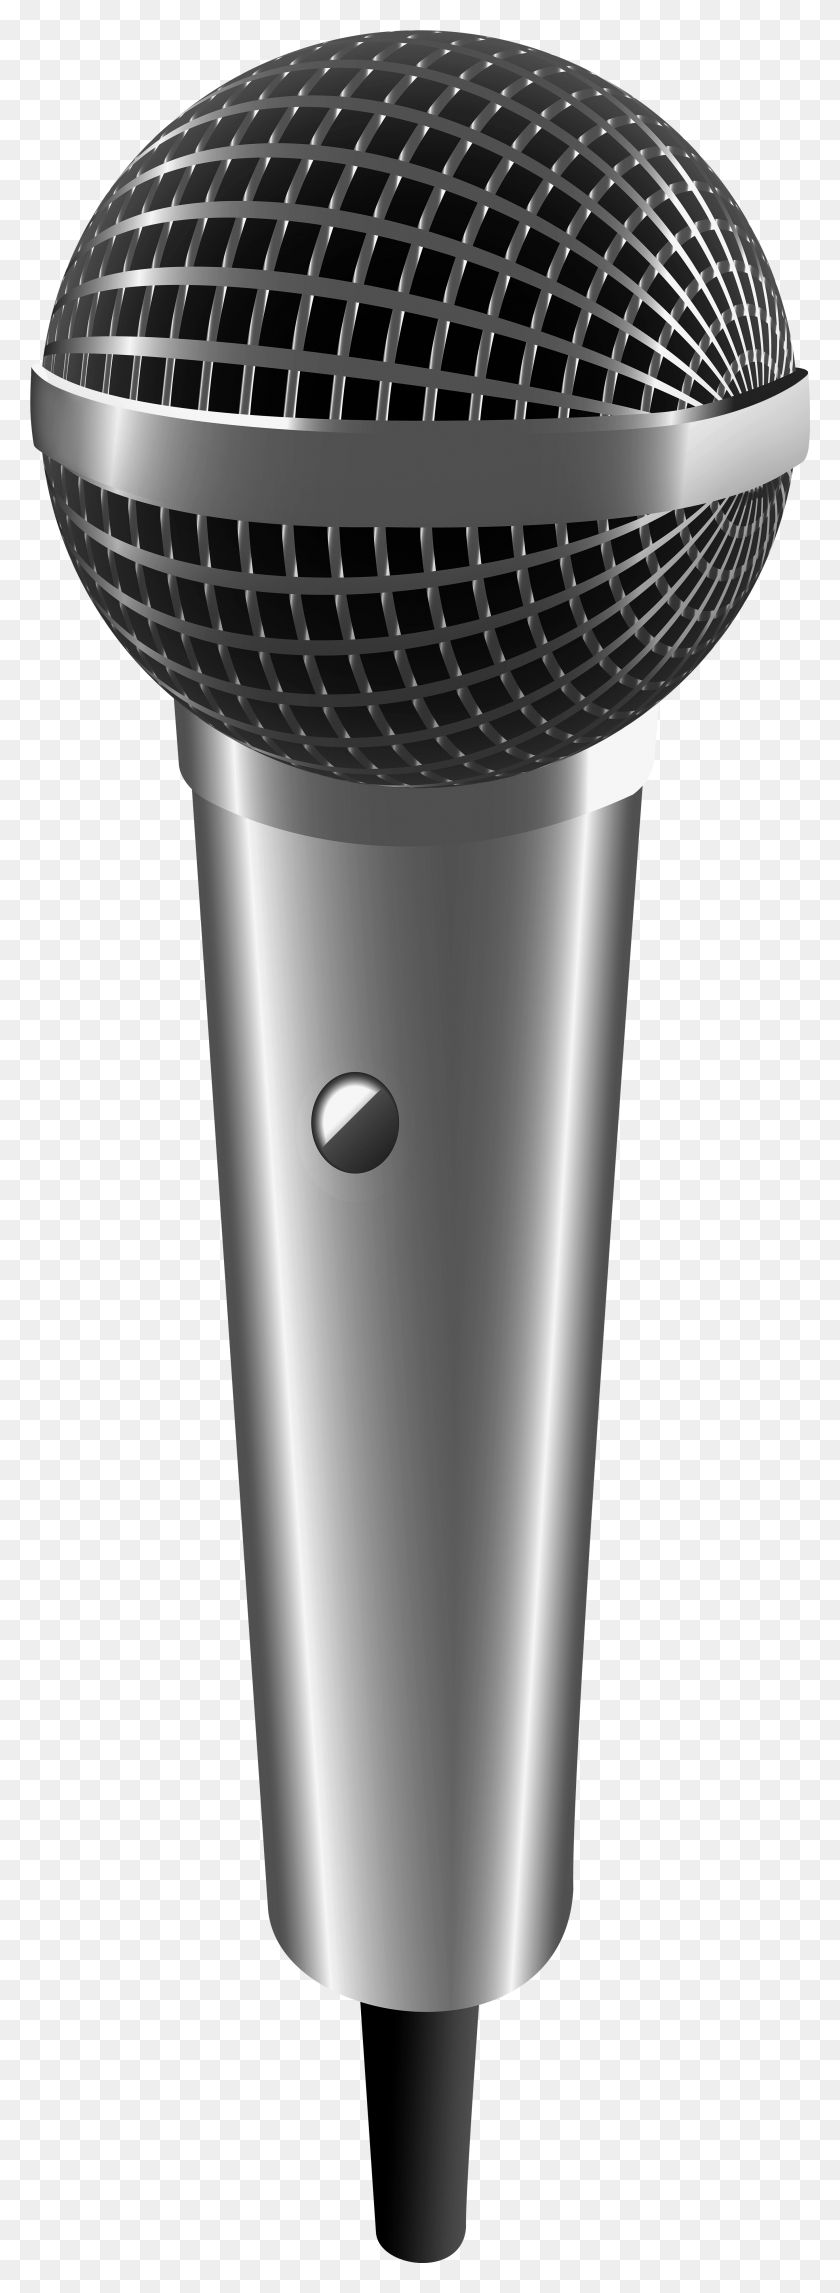 2750x7875 View Full Size Transparent Gold Microphone, Electrical Device, Shaker, Bottle Descargar Hd Png